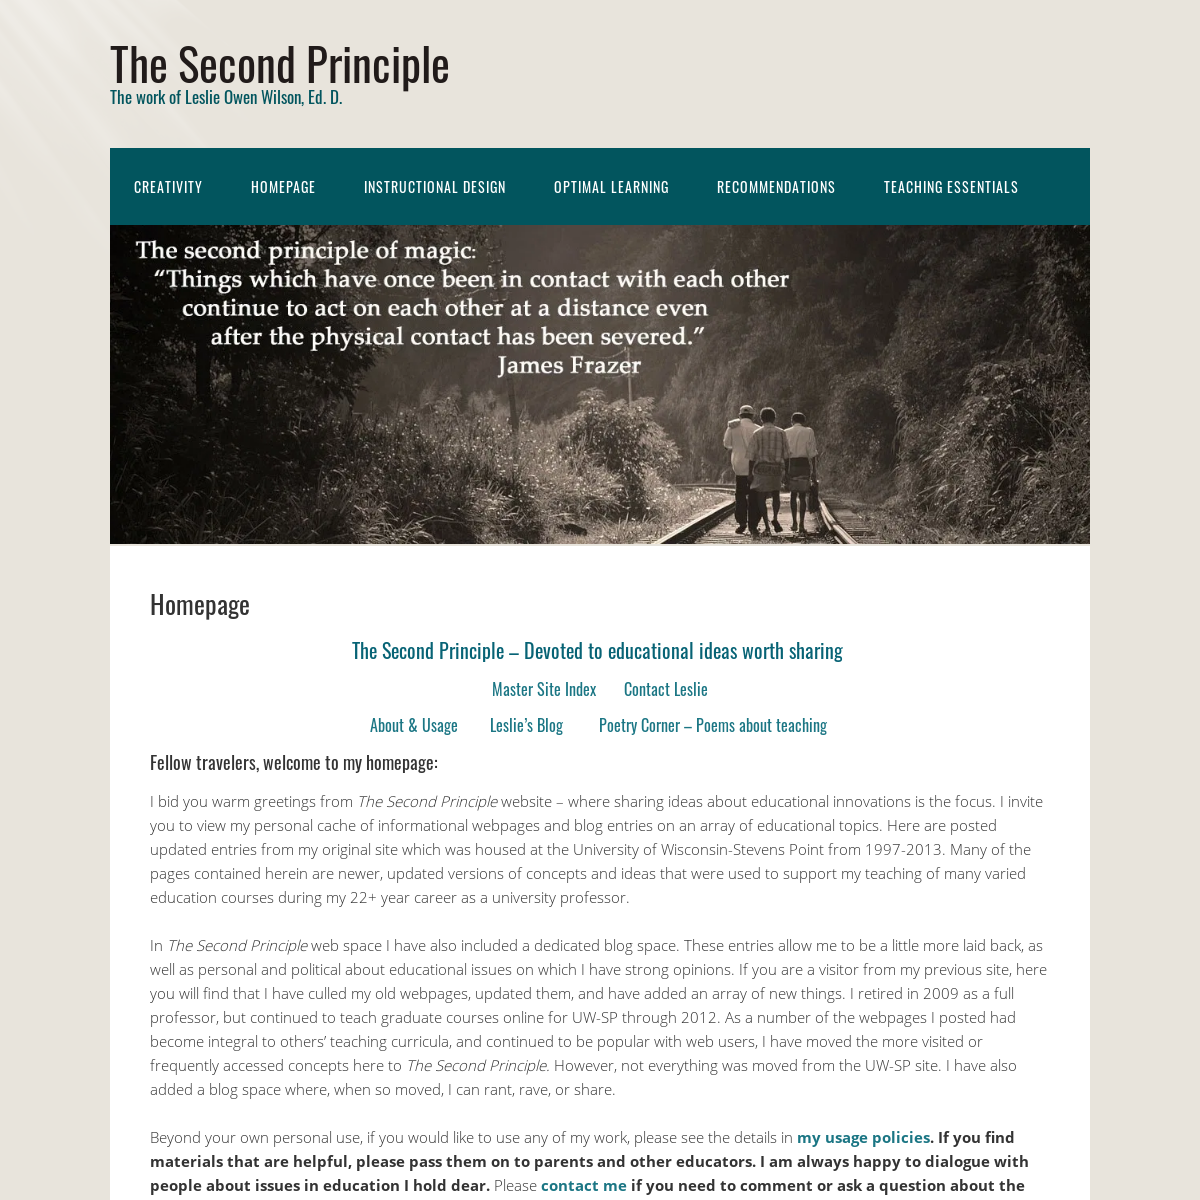 A complete backup of thesecondprinciple.com